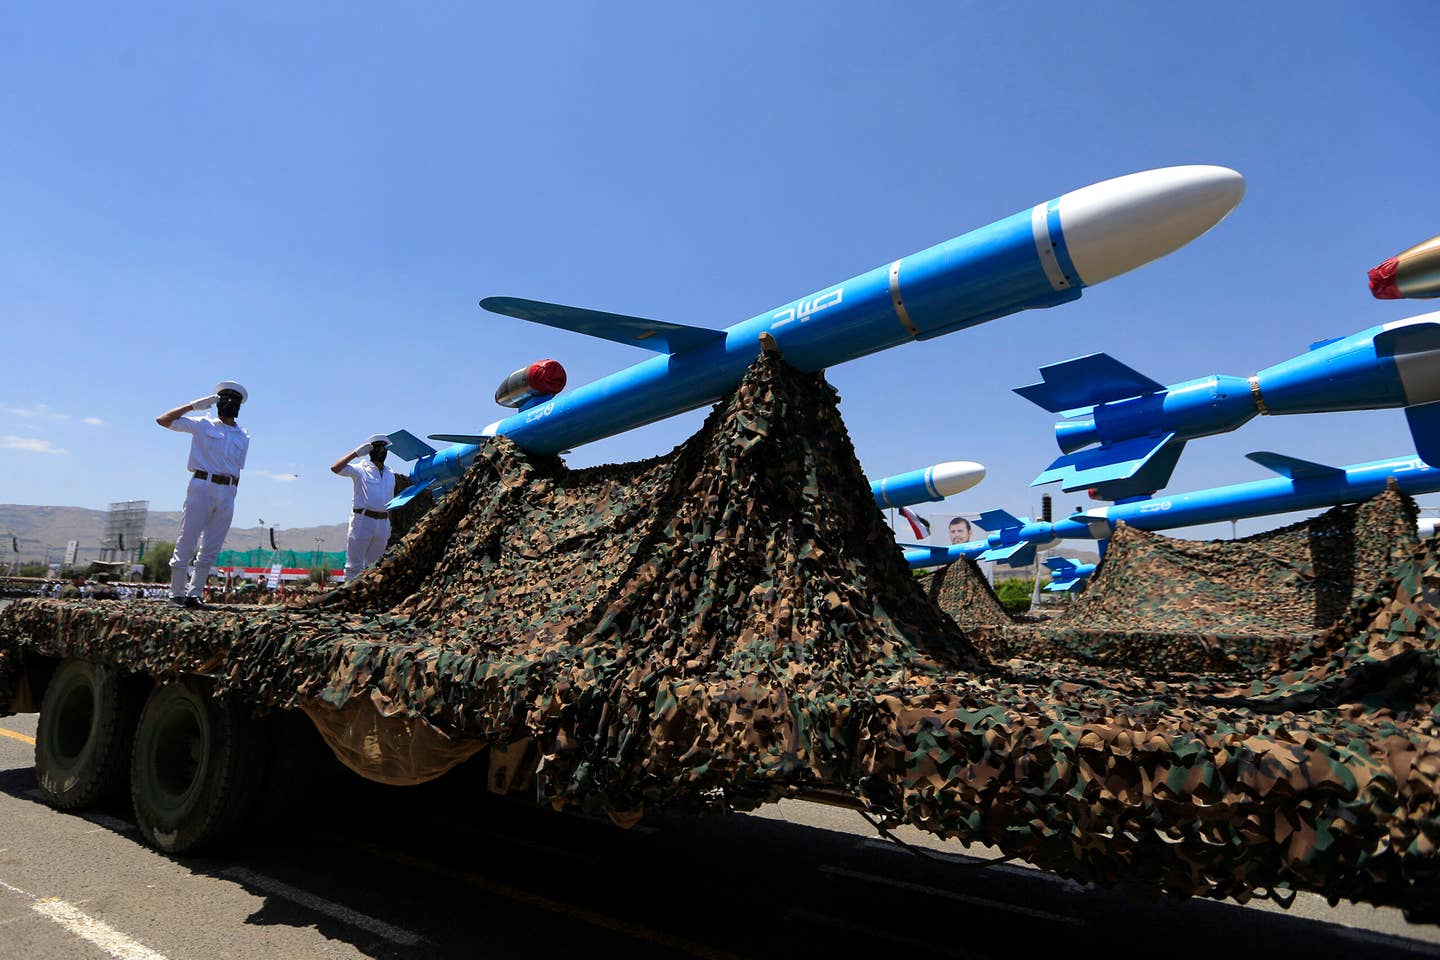 Soldiers stand guard on a Quds-type cruise missile during an official military parade marking the ninth anniversary of the Houthi takeover of the Yemeni capital, Sanaa, on September 21, 2023. <em>Photo by MOHAMMED HUWAIS/AFP via Getty Images</em>